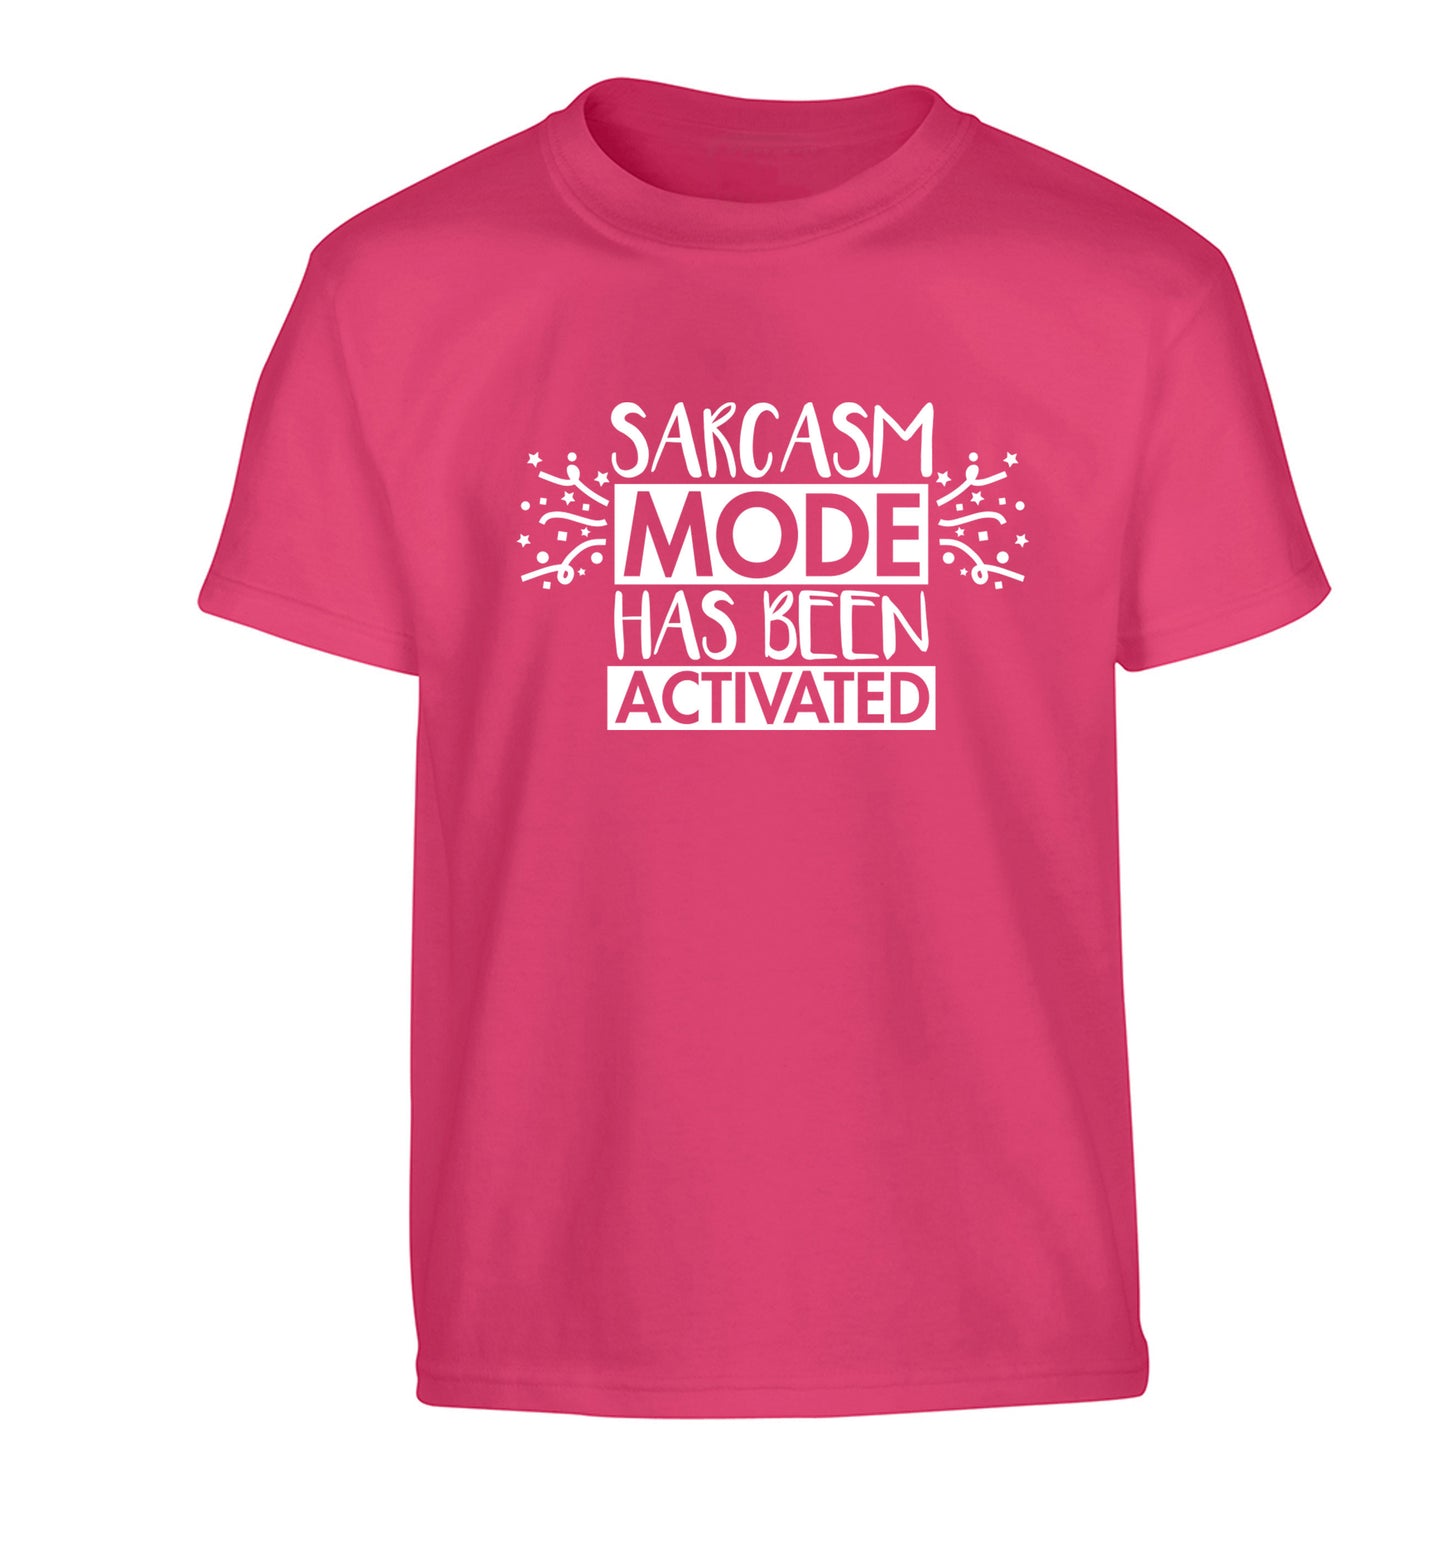 Sarcarsm mode has been activated Children's pink Tshirt 12-14 Years